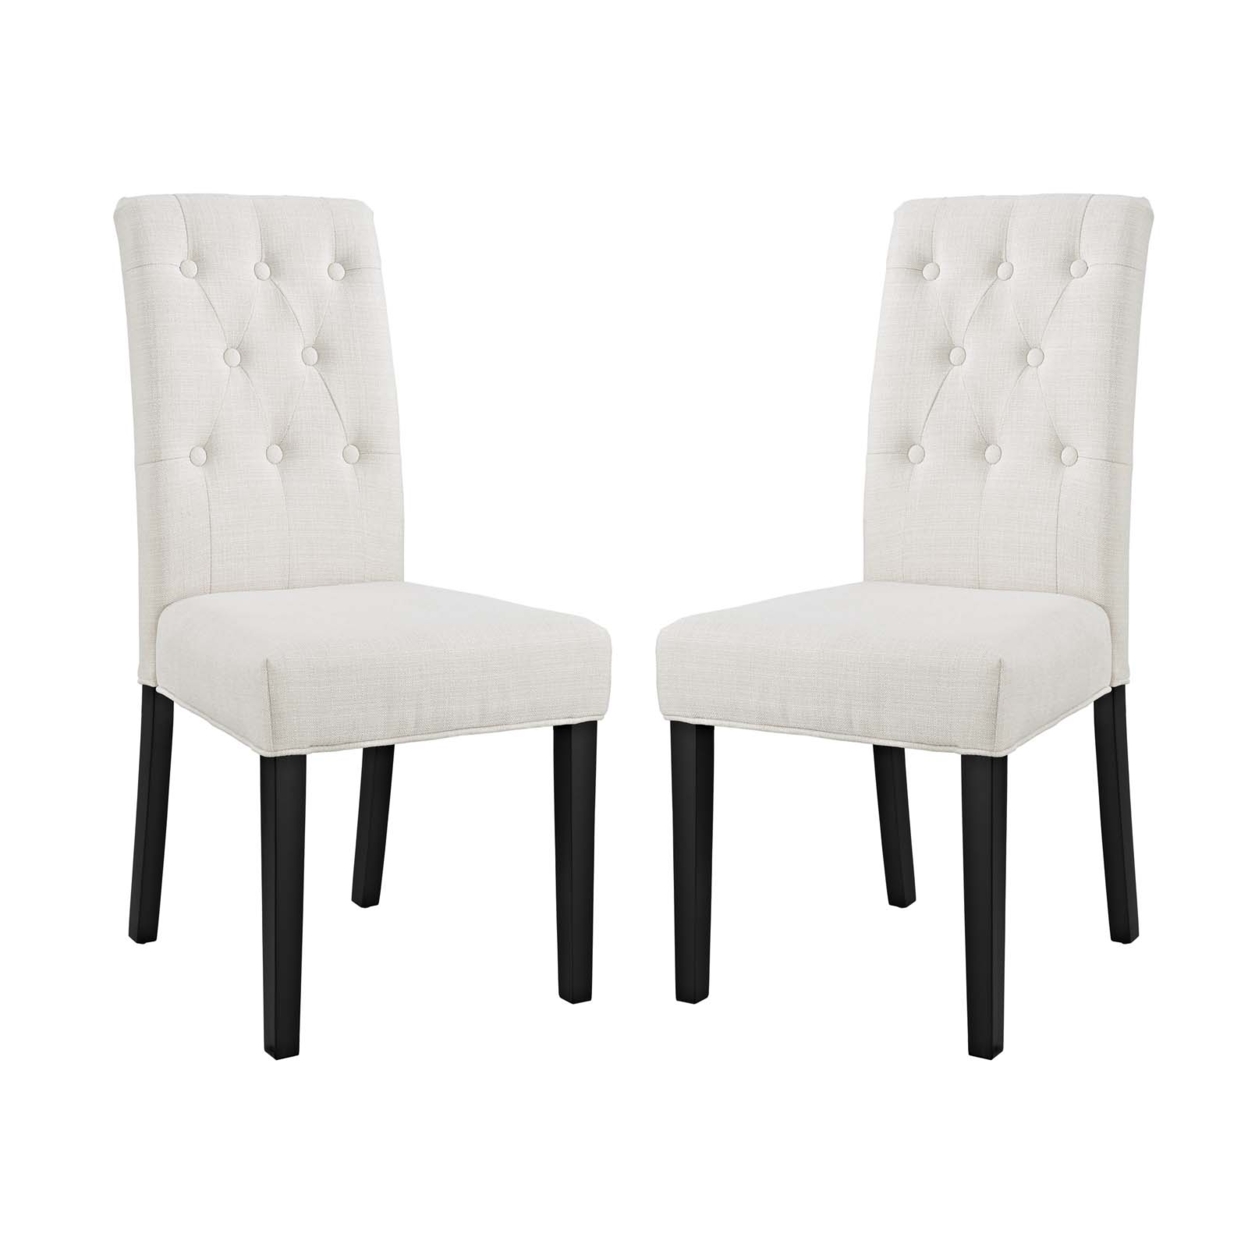 Confer Dining Side Chair Fabric Set Of 2,Beige